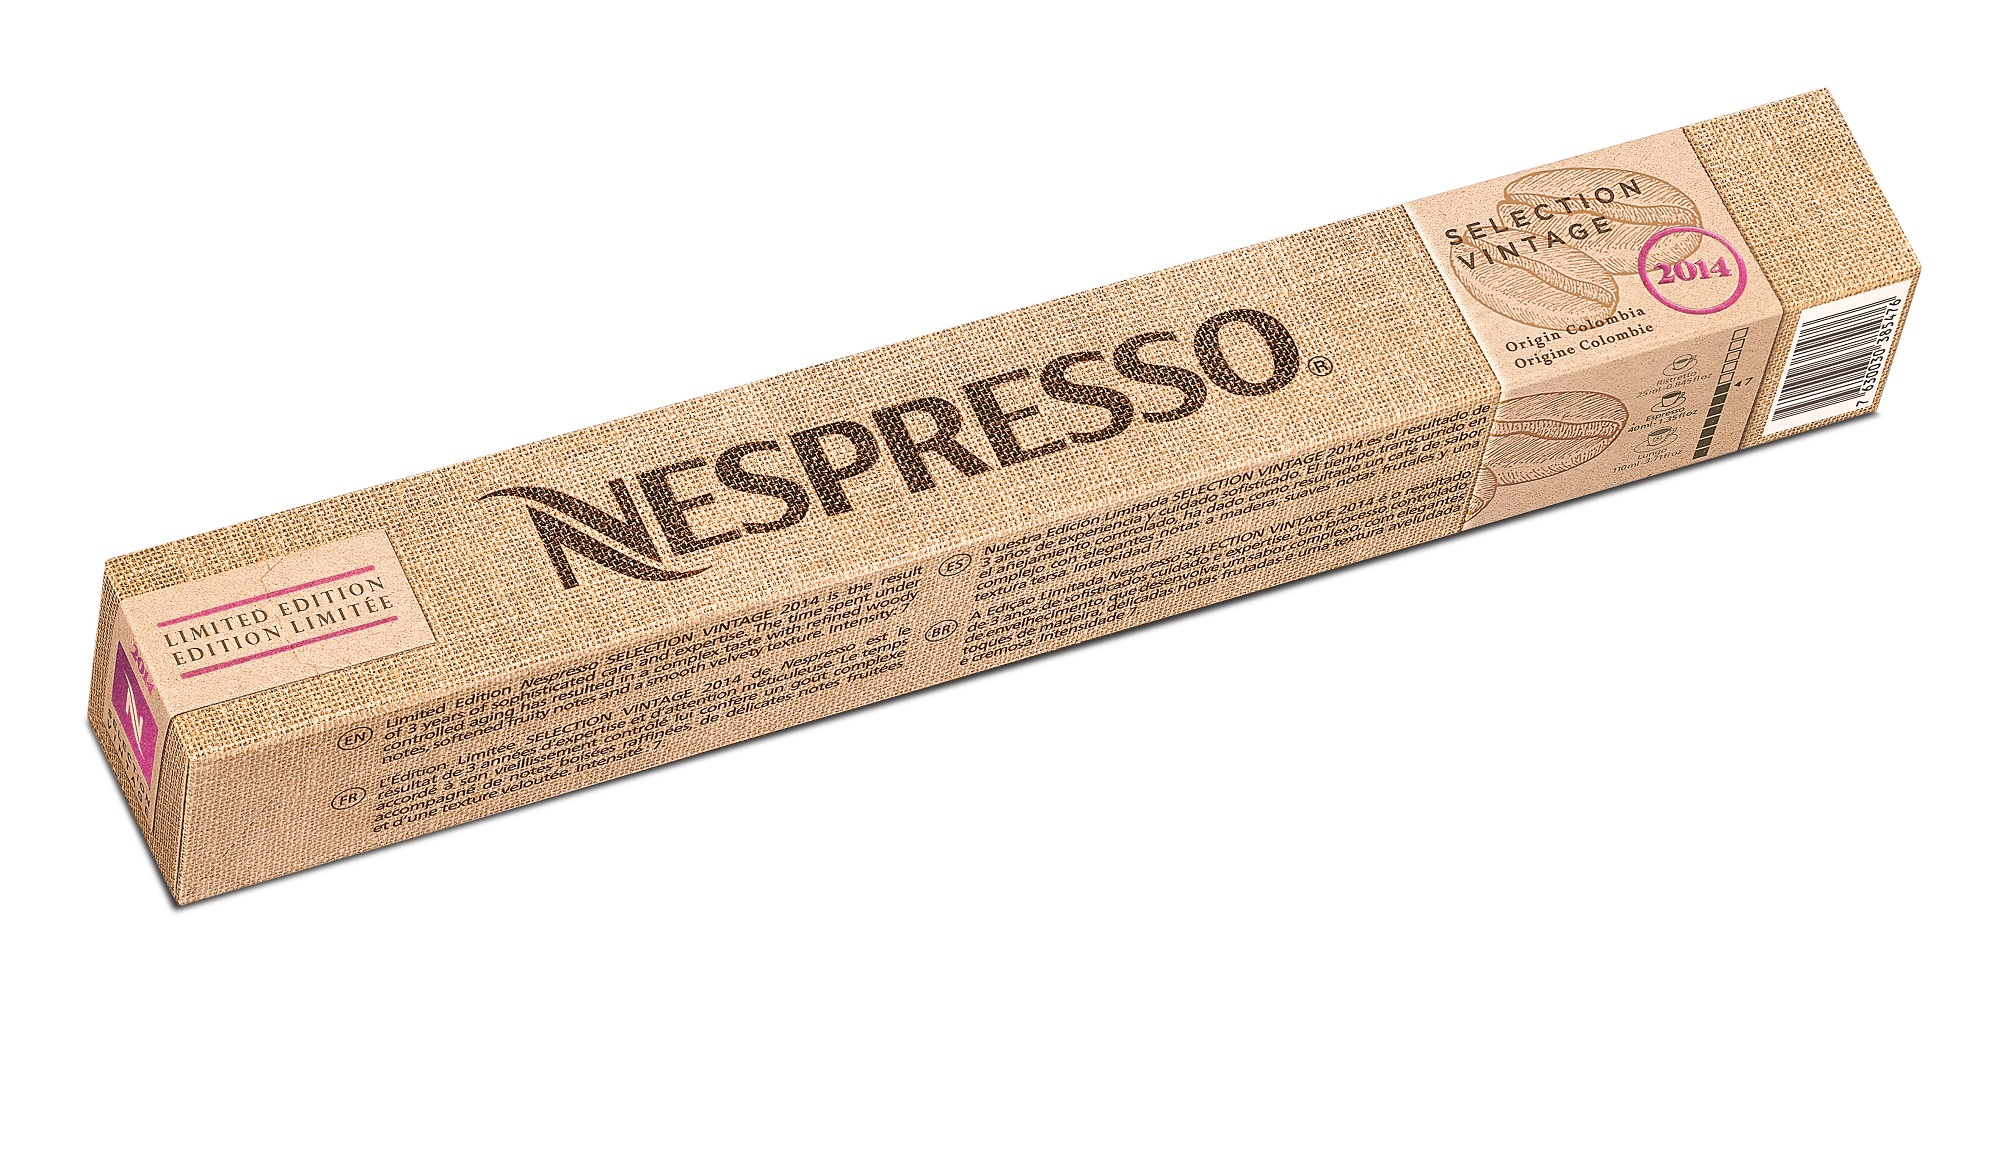 Nespresso SELECTION VINTAGE 2014 Flavour Profile and Price-Pamper.my